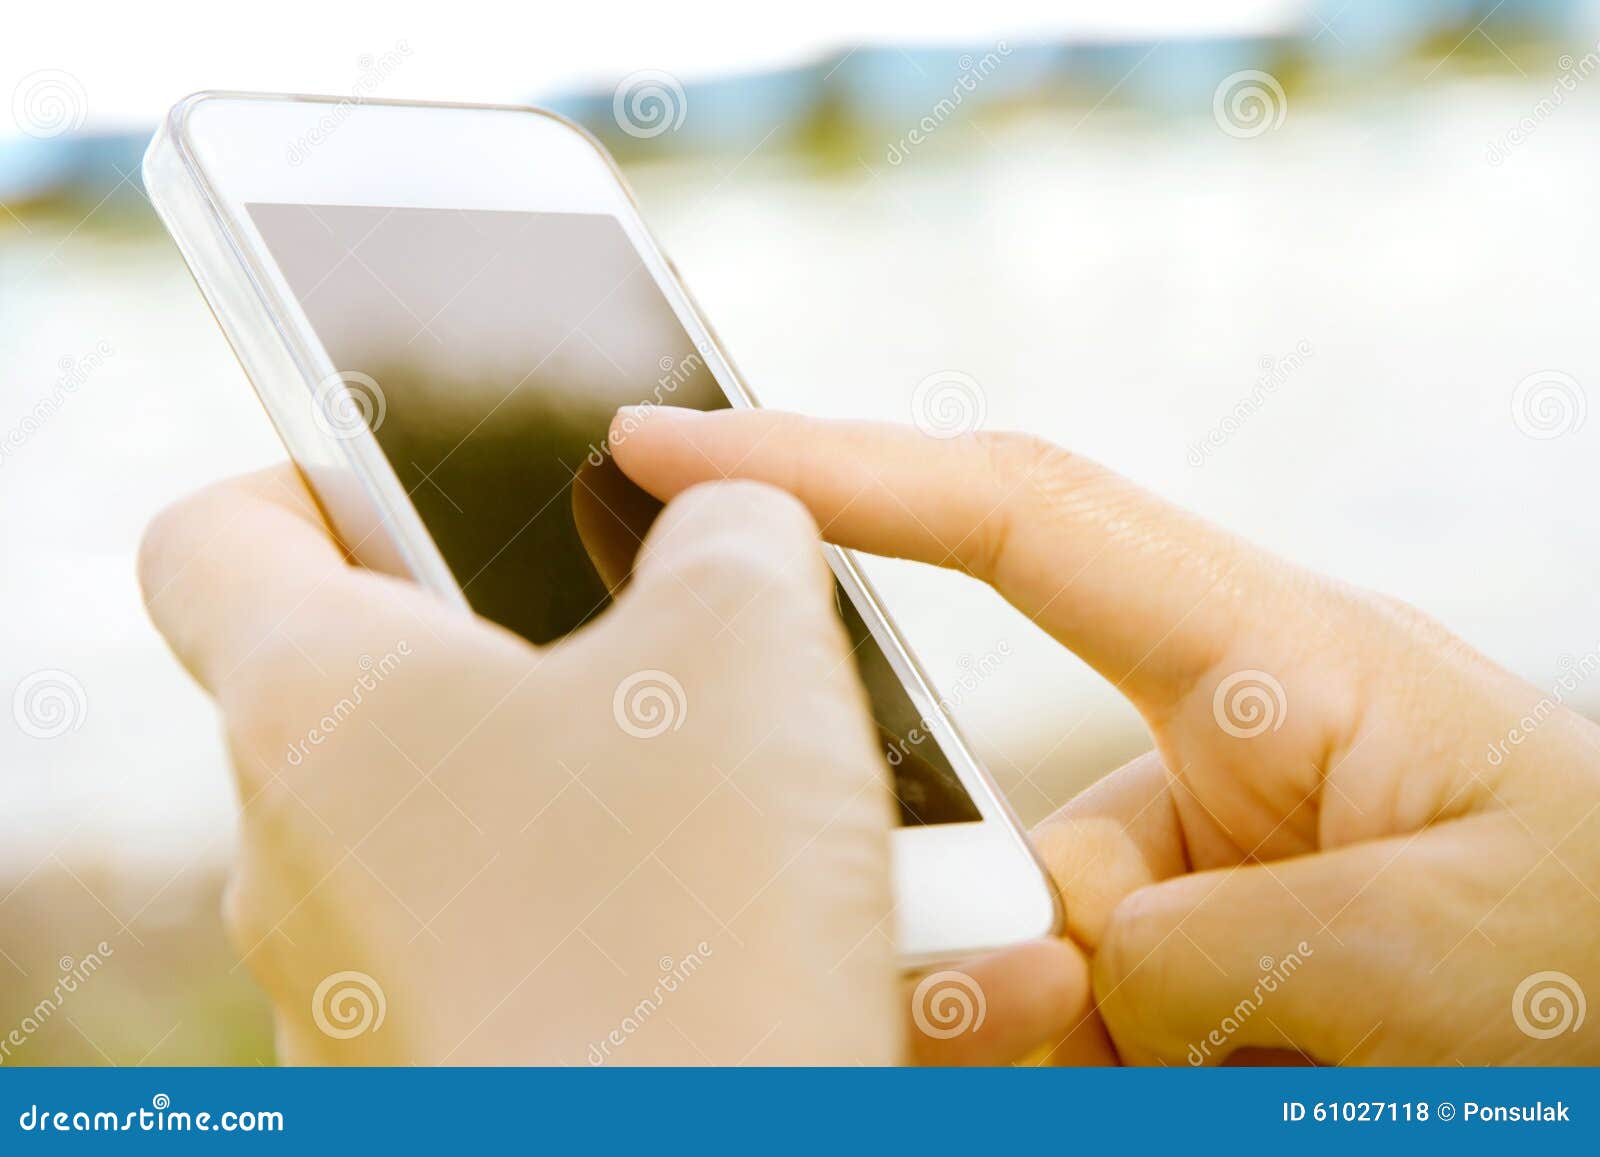 Using a Smart Phone Background Stock Photo - Image of color, concepts ...